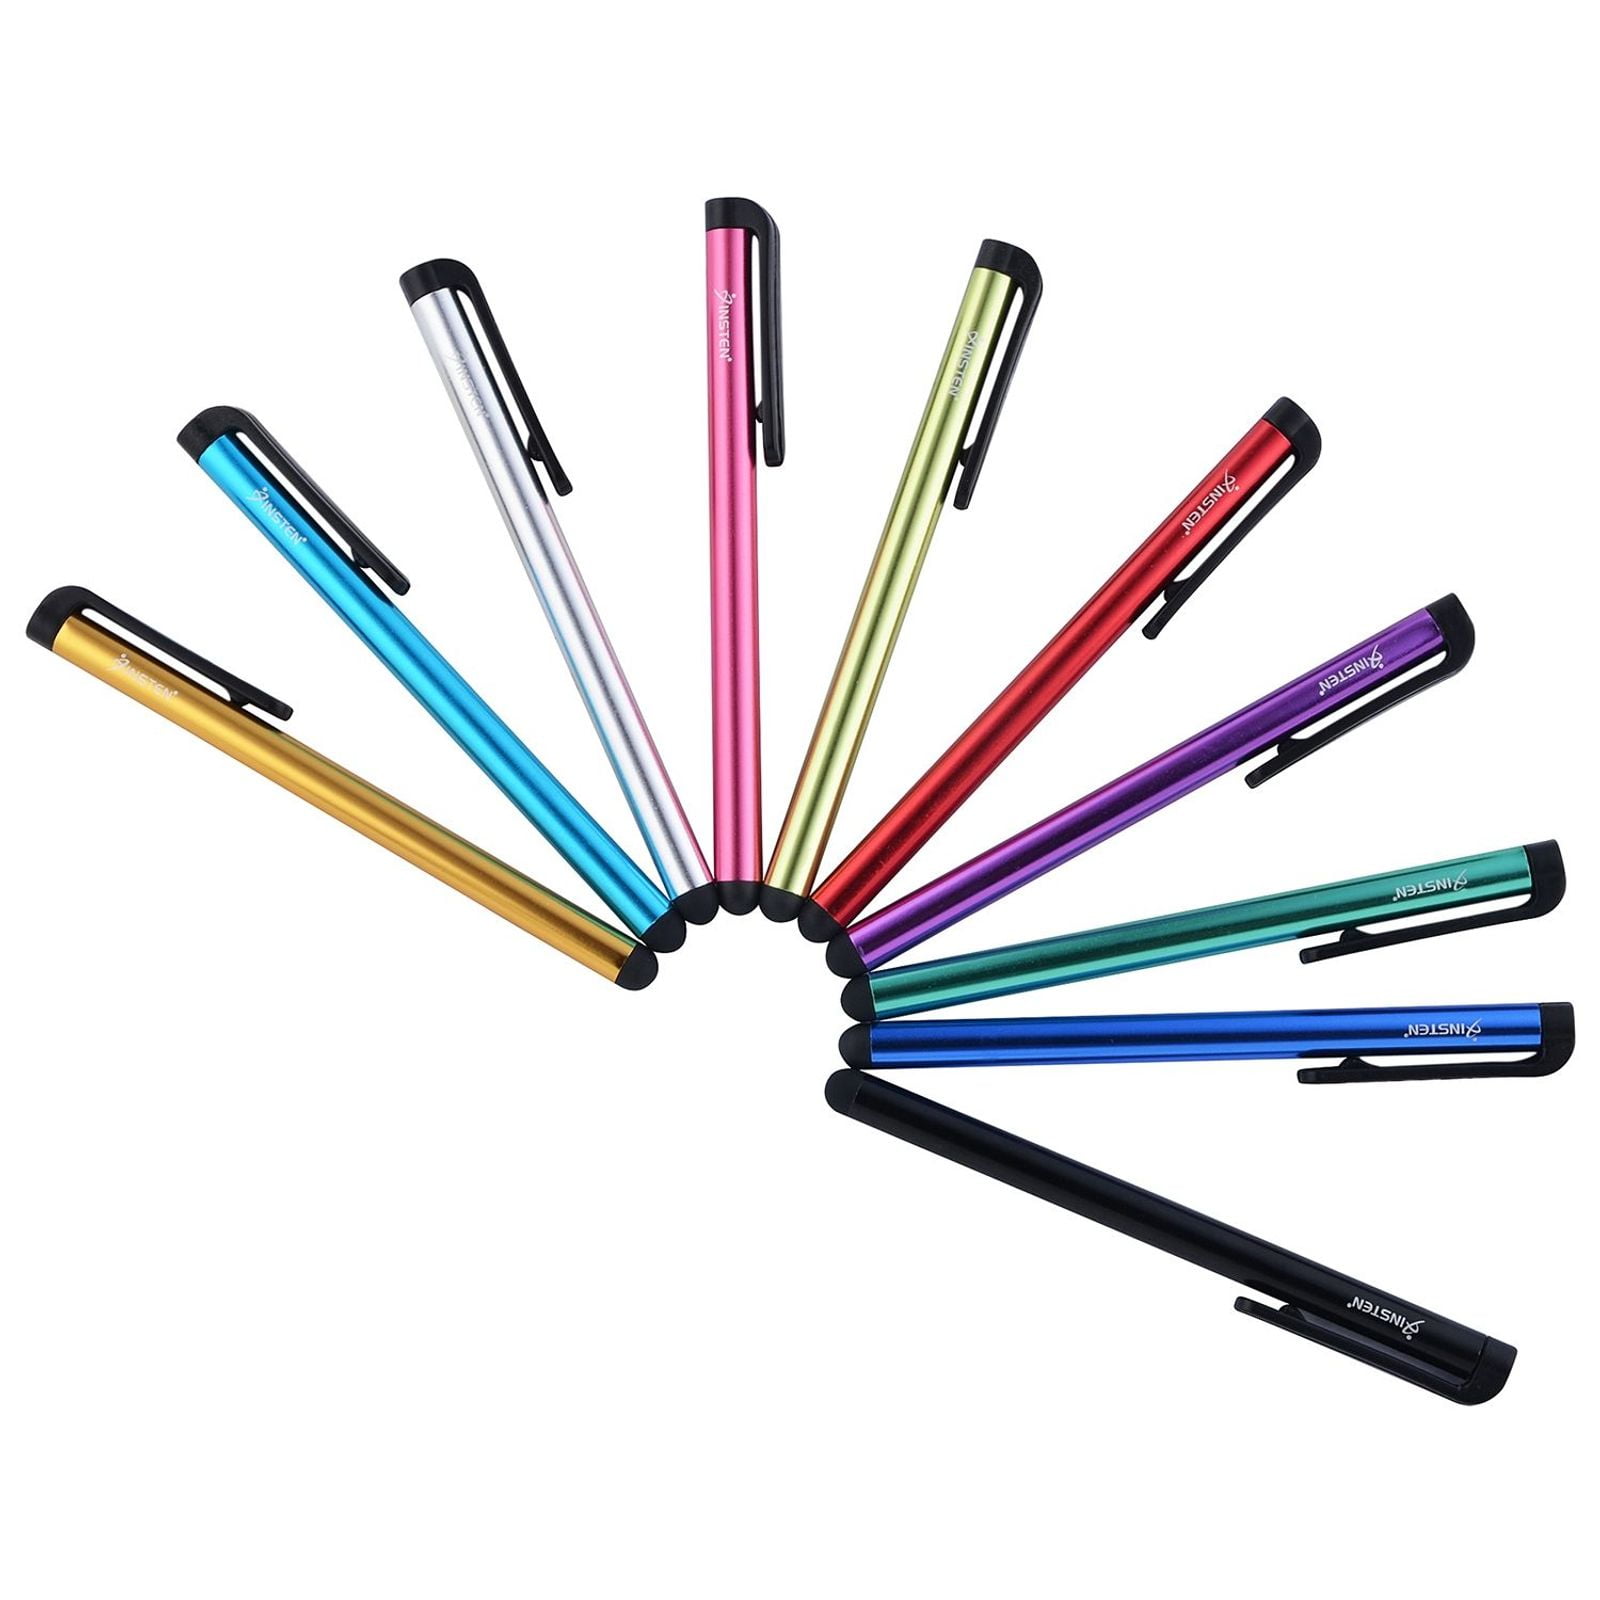 FONKEN Stylus Pen For Iphone Android Tablet Pen Drawing Pencil 2in1  Capacitive Screen Touch Pen Mobile Phone Smart Pen Accessory - Price  history & Review | AliExpress Seller - FONKEN Ofical Flagship